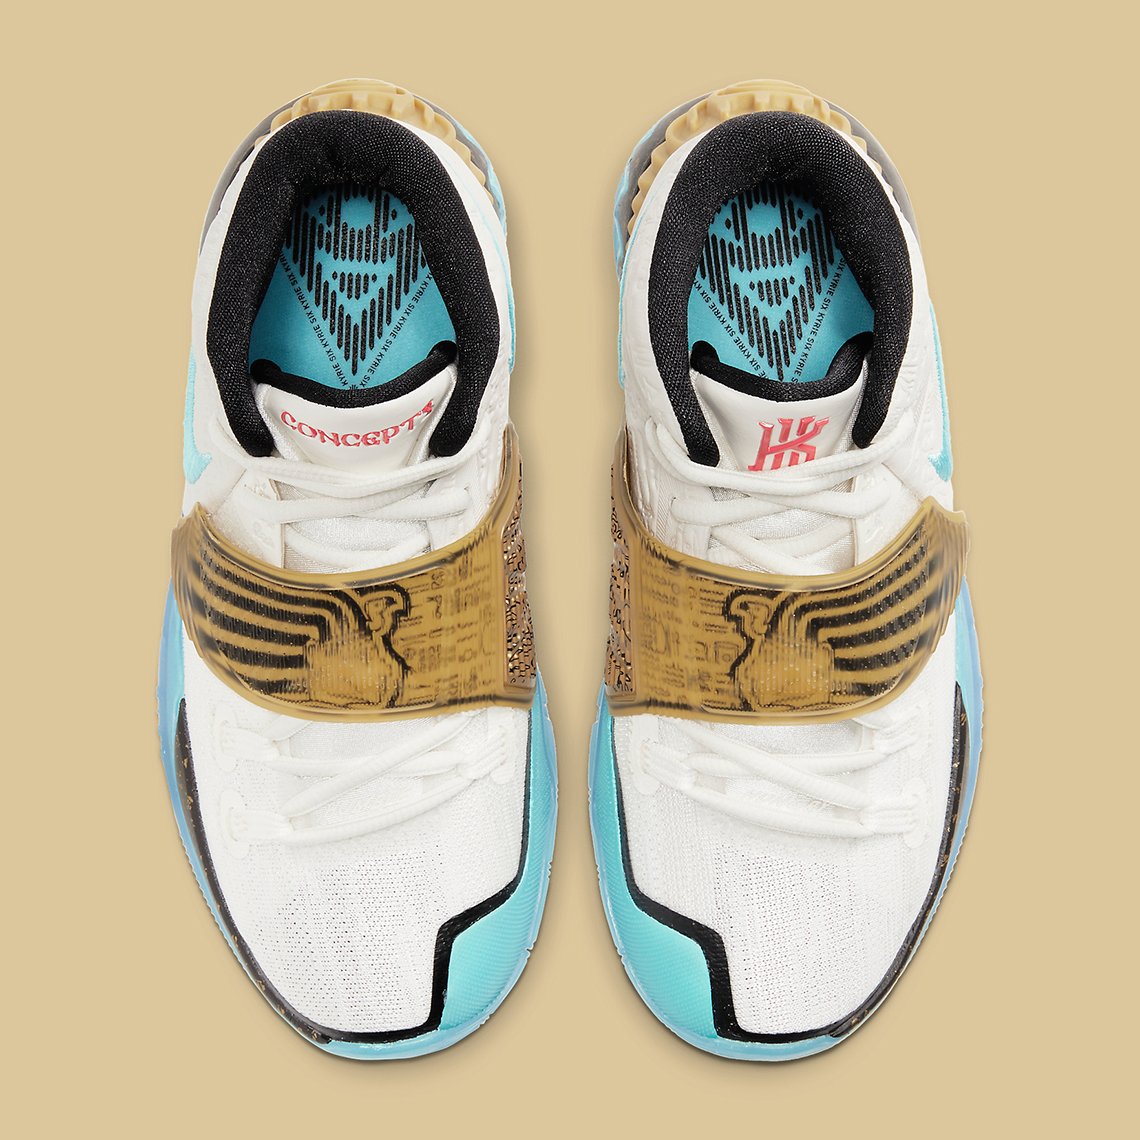 kyrie mummy shoes